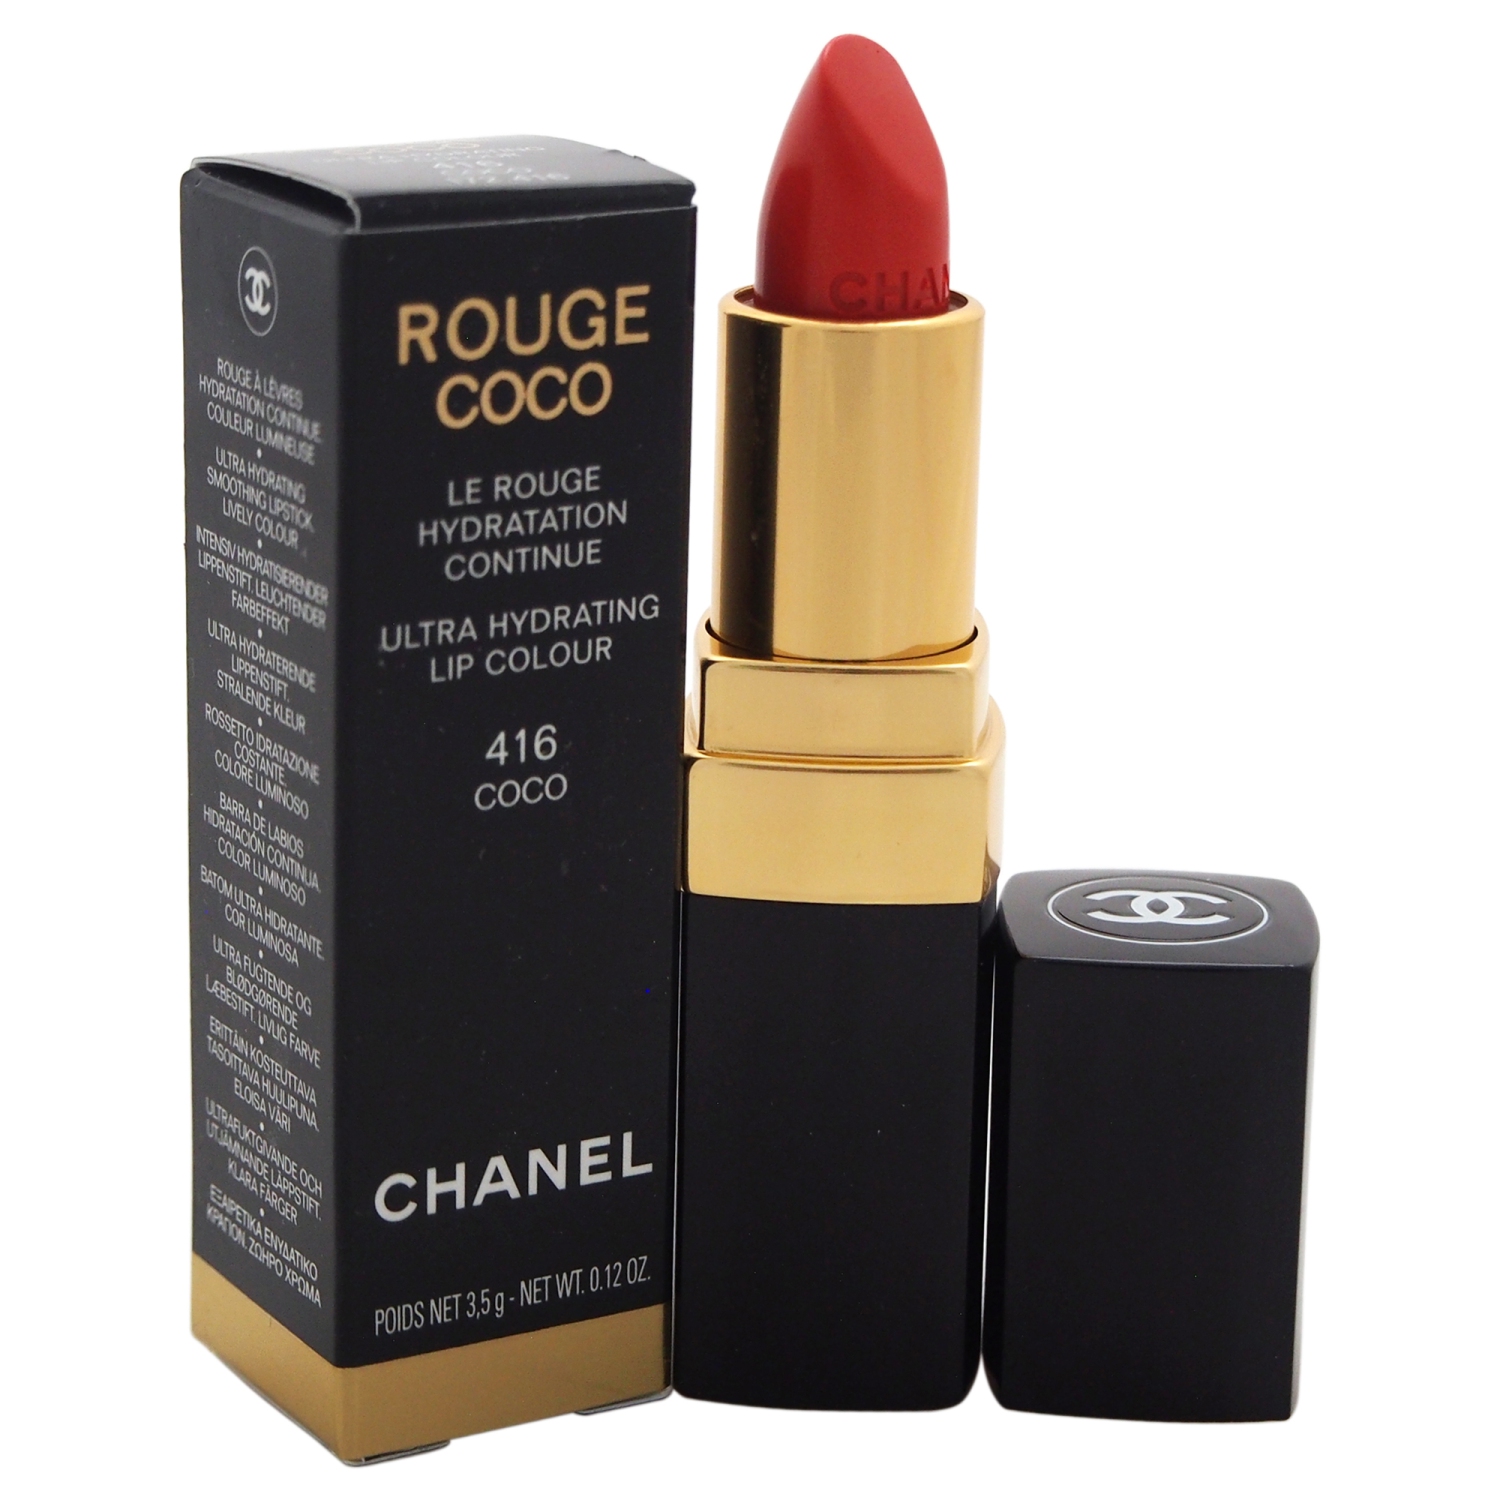 Rouge Coco Shine Hydrating Sheer Lipshine - 416 Coco by Chanel for Women - 0.11 oz Lipstick (Limited Edition)